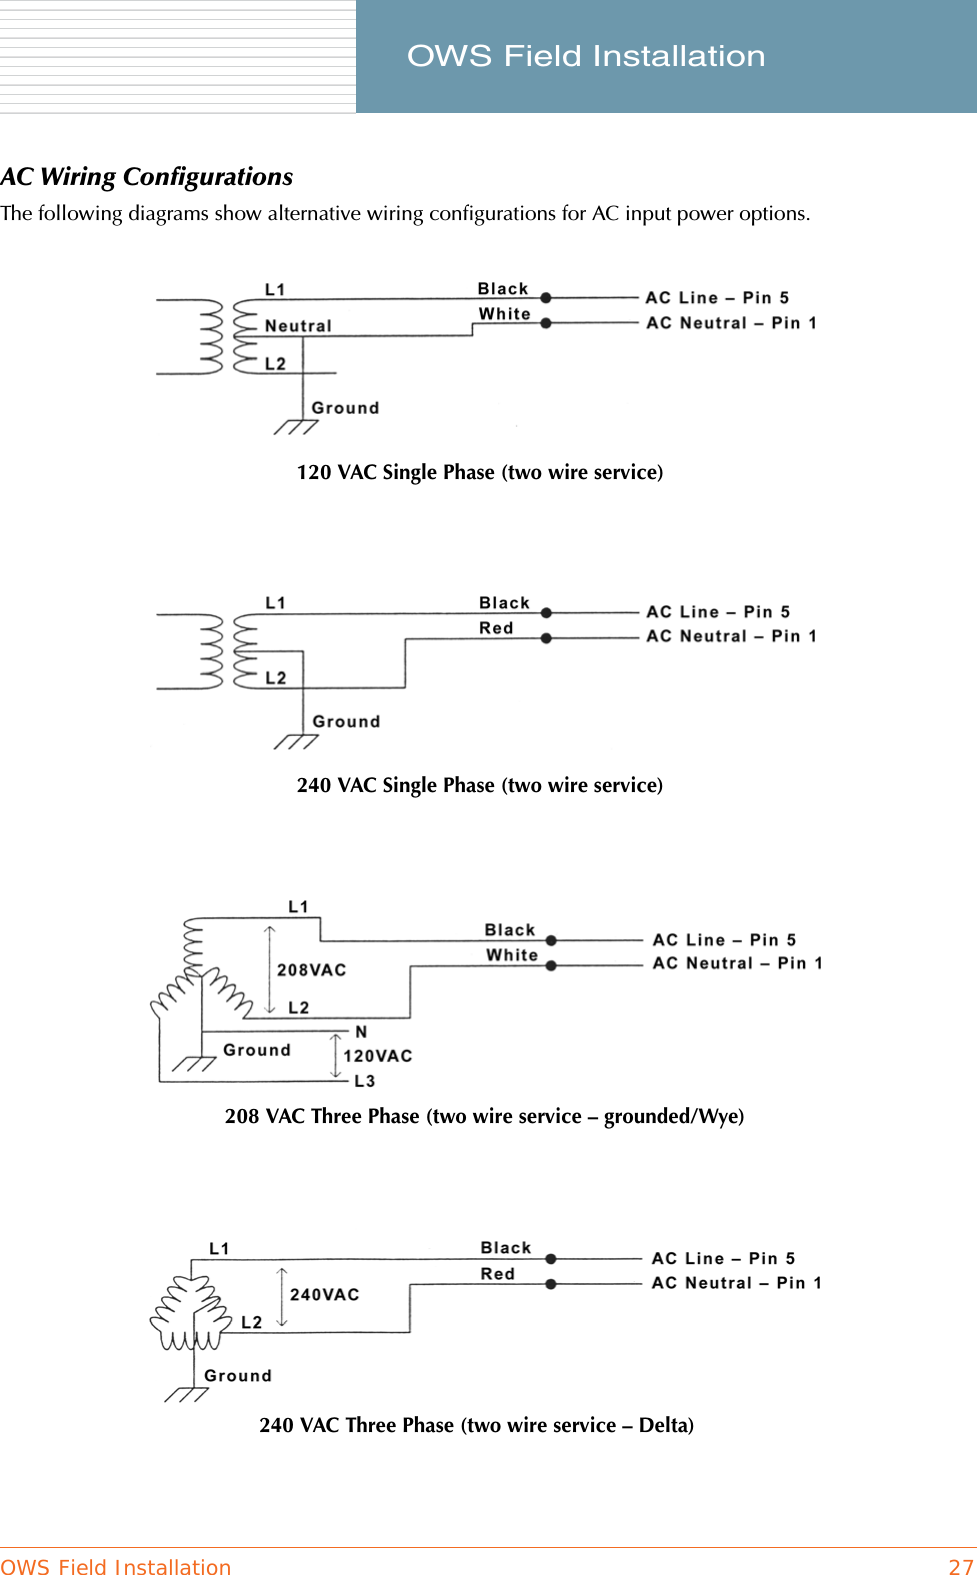 OWS Field Installation 27     OWS Field InstallationAC Wiring ConfigurationsThe following diagrams show alternative wiring configurations for AC input power options.120 VAC Single Phase (two wire service)240 VAC Single Phase (two wire service)208 VAC Three Phase (two wire service – grounded/Wye) 240 VAC Three Phase (two wire service – Delta)